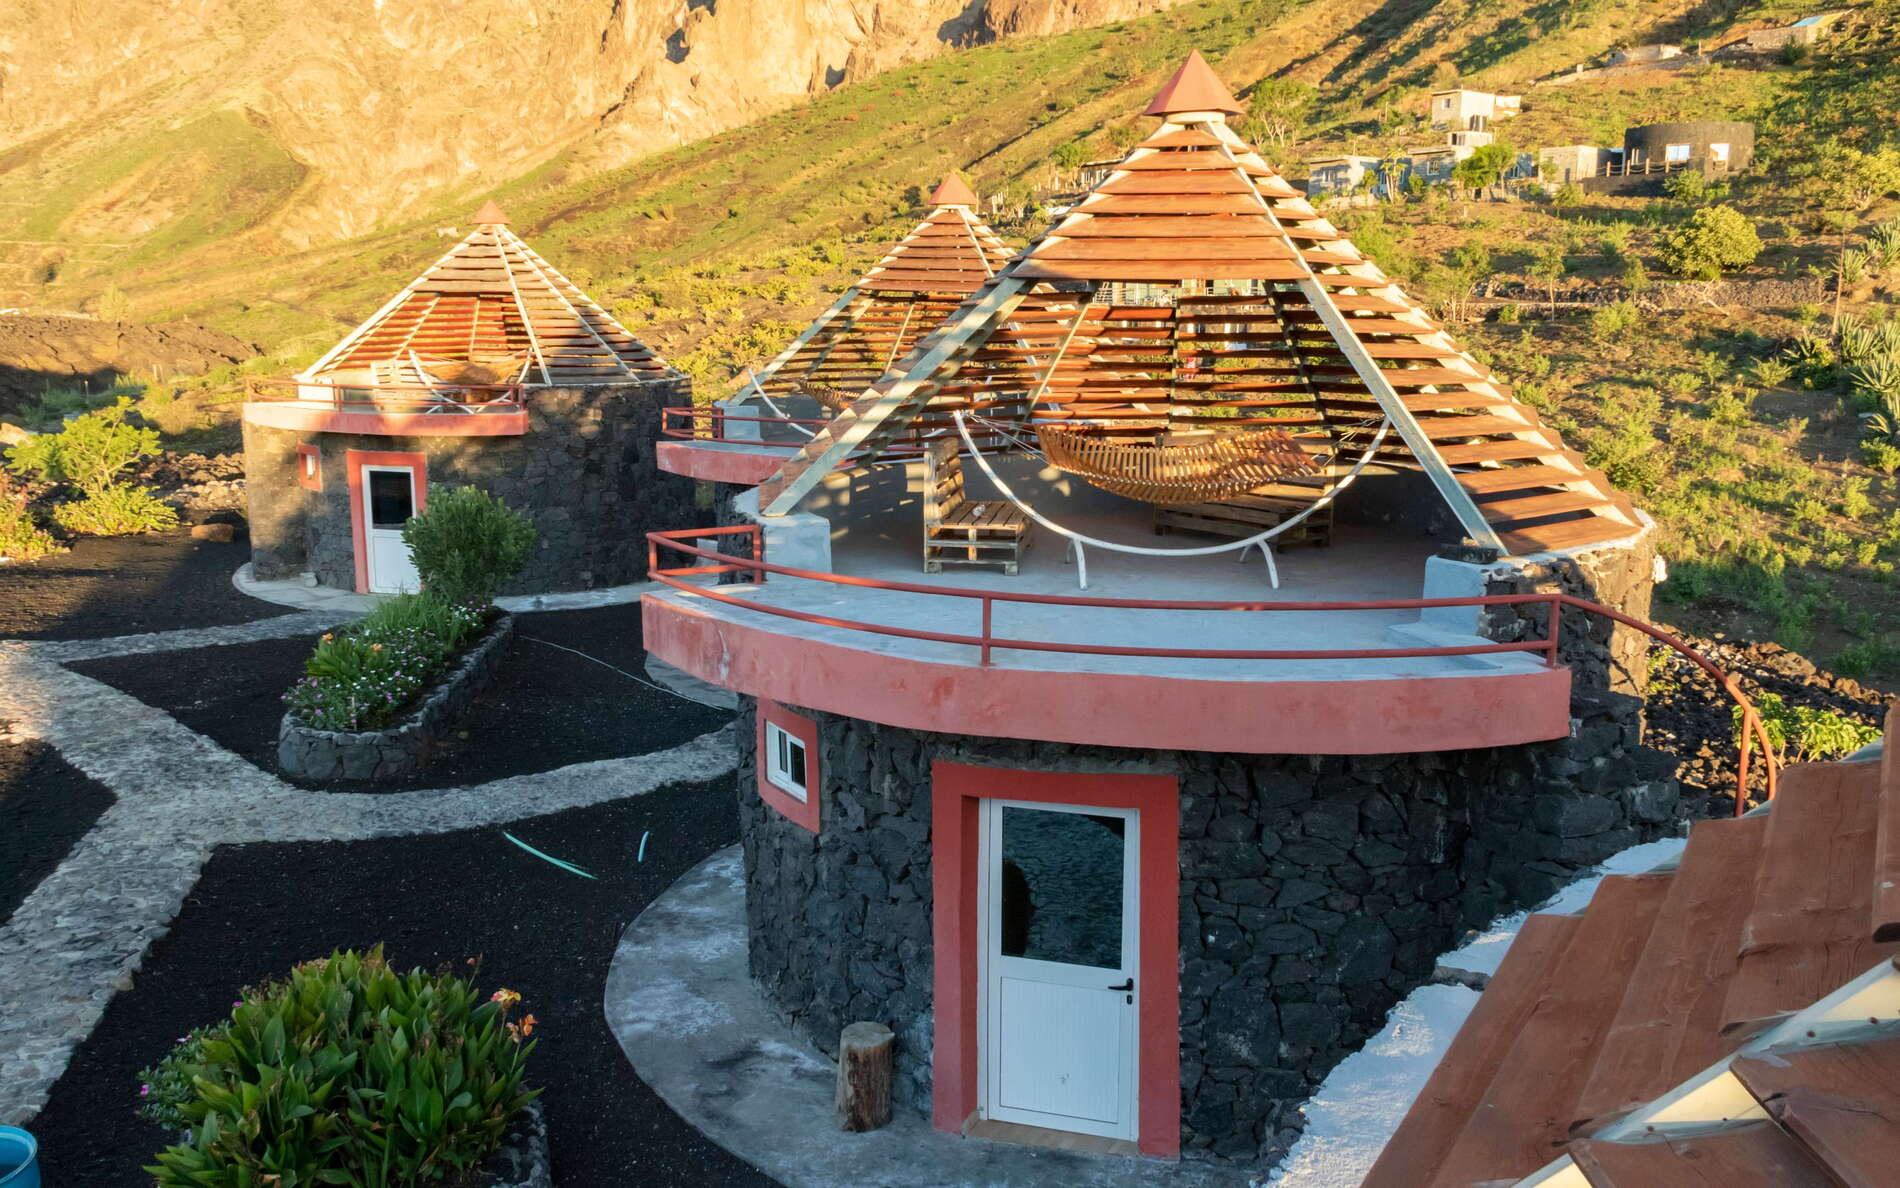 Fogo | Traditional building style at Portela